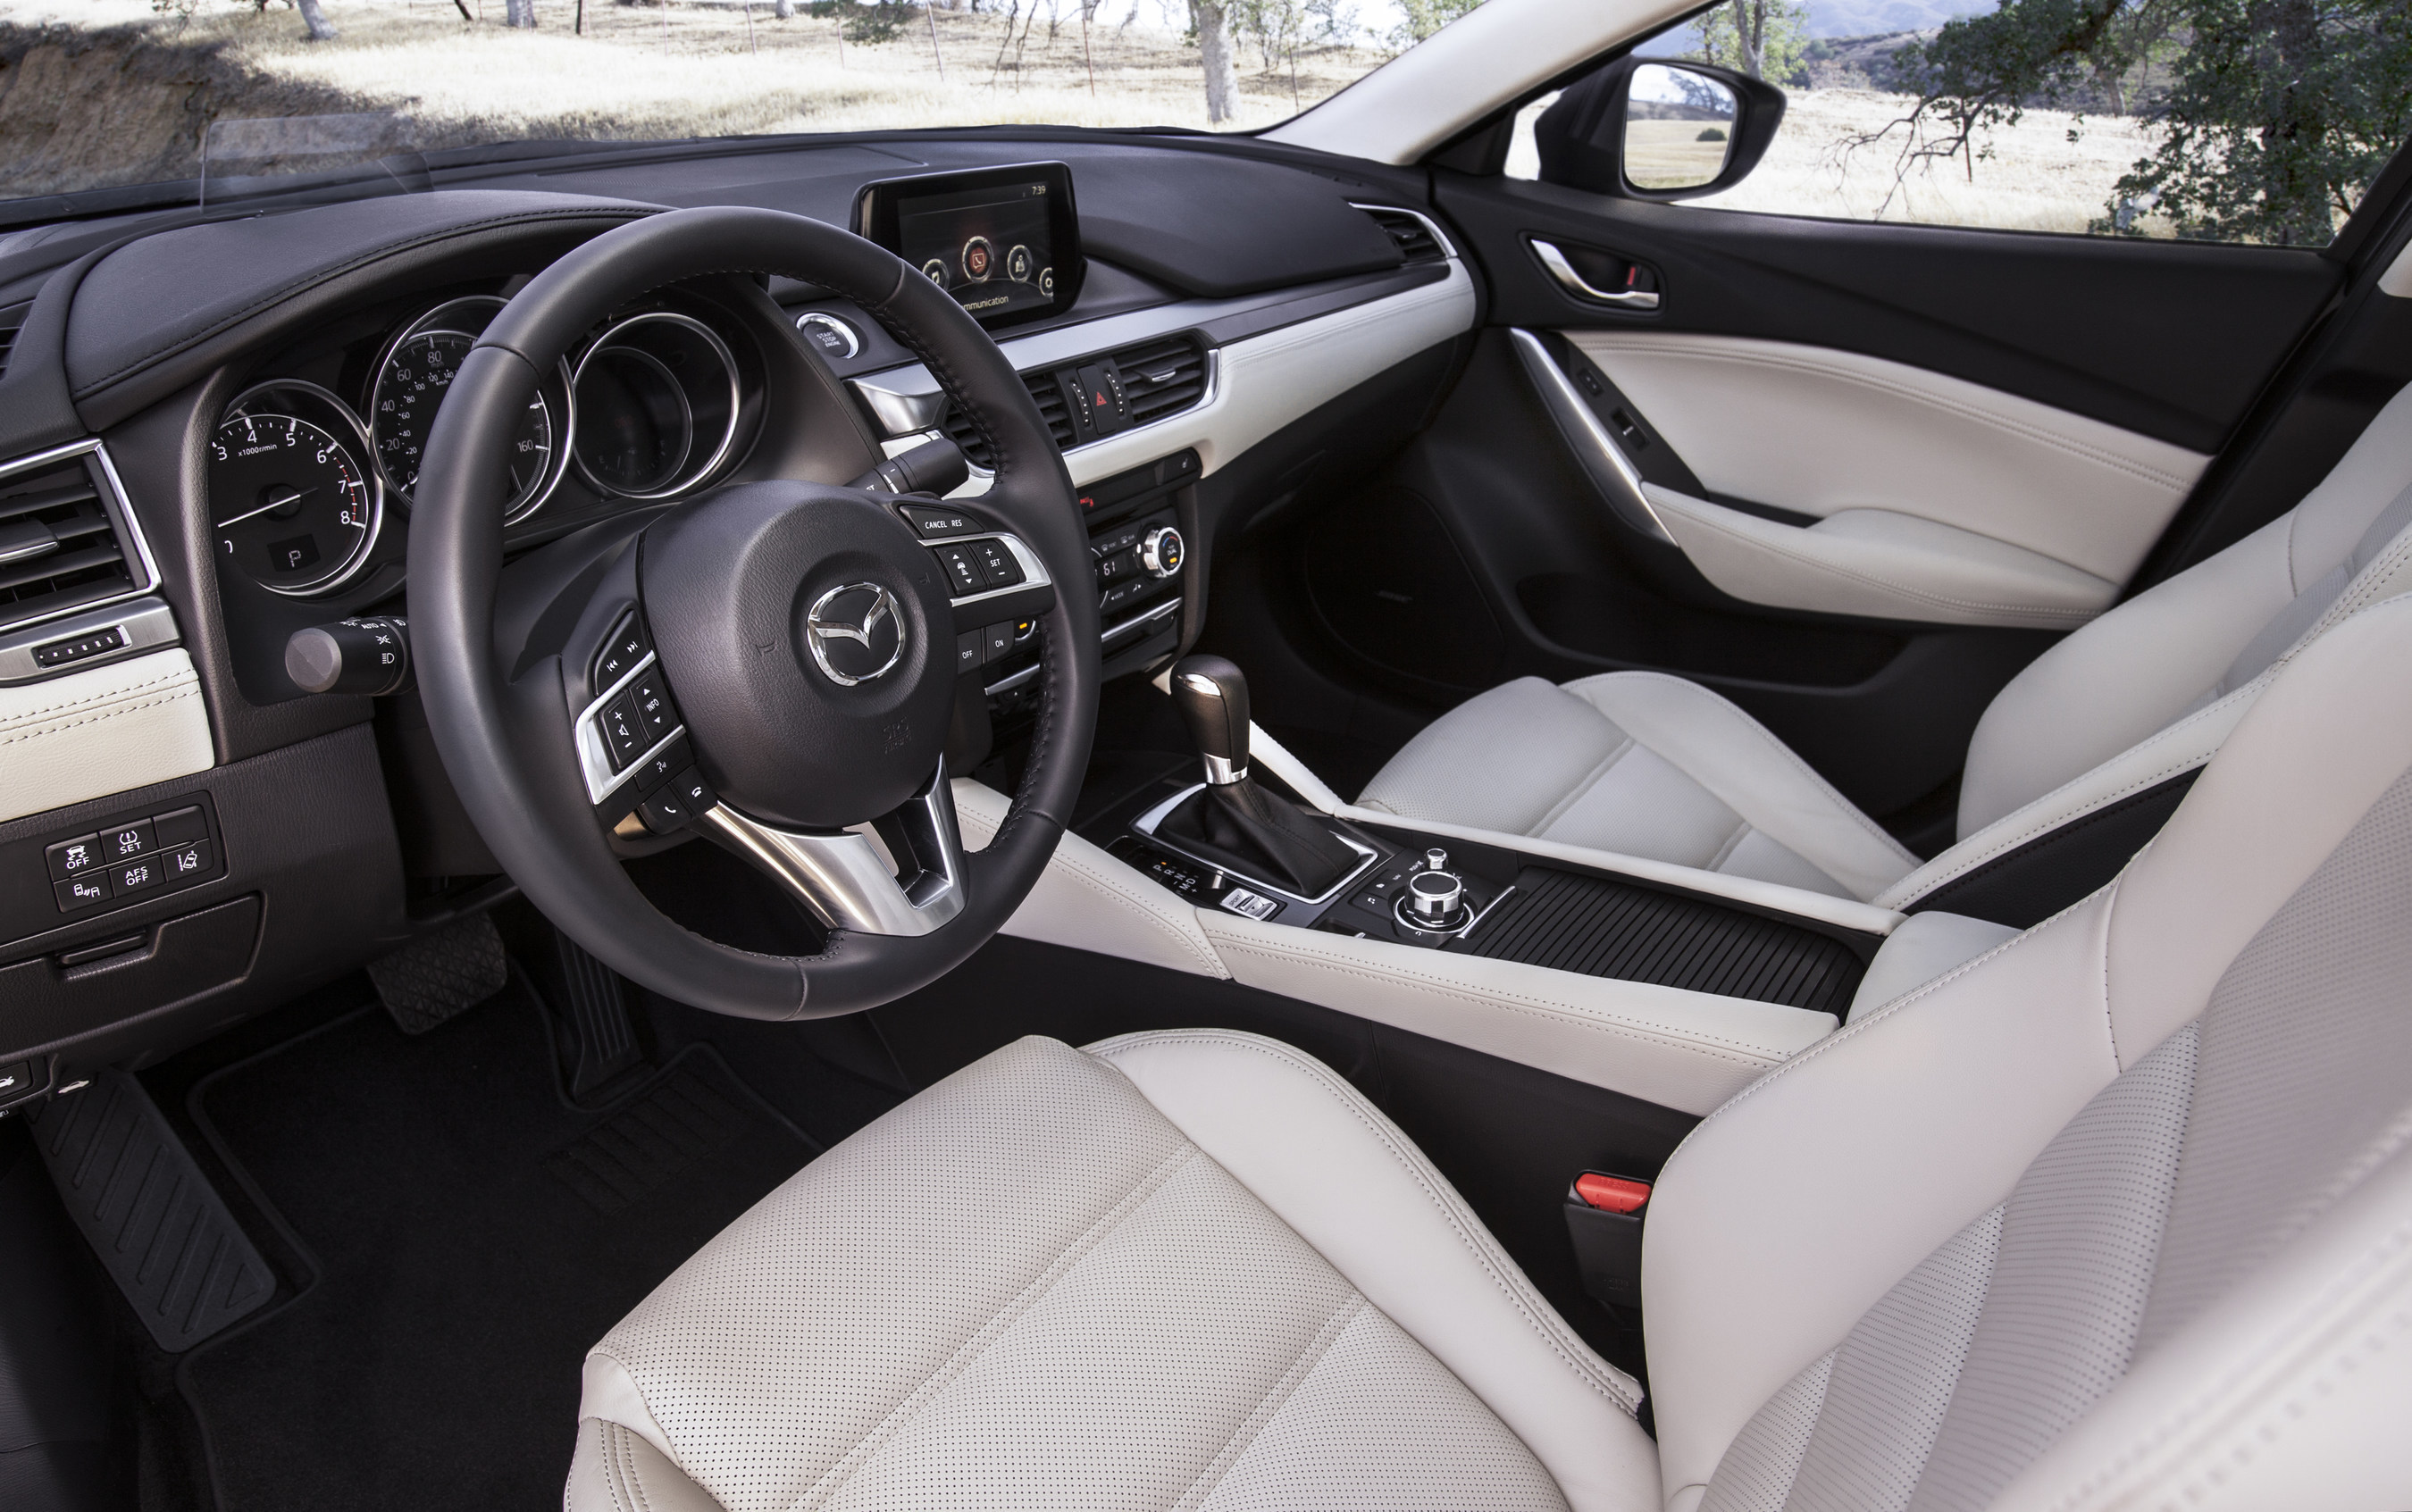 The 2016 Mazda6 has been named one of "Ward's 10 Best Interiors," taking honors among a competitive set of 42 all-new interiors that includes cars, trucks, SUVs and crossovers at all price points.